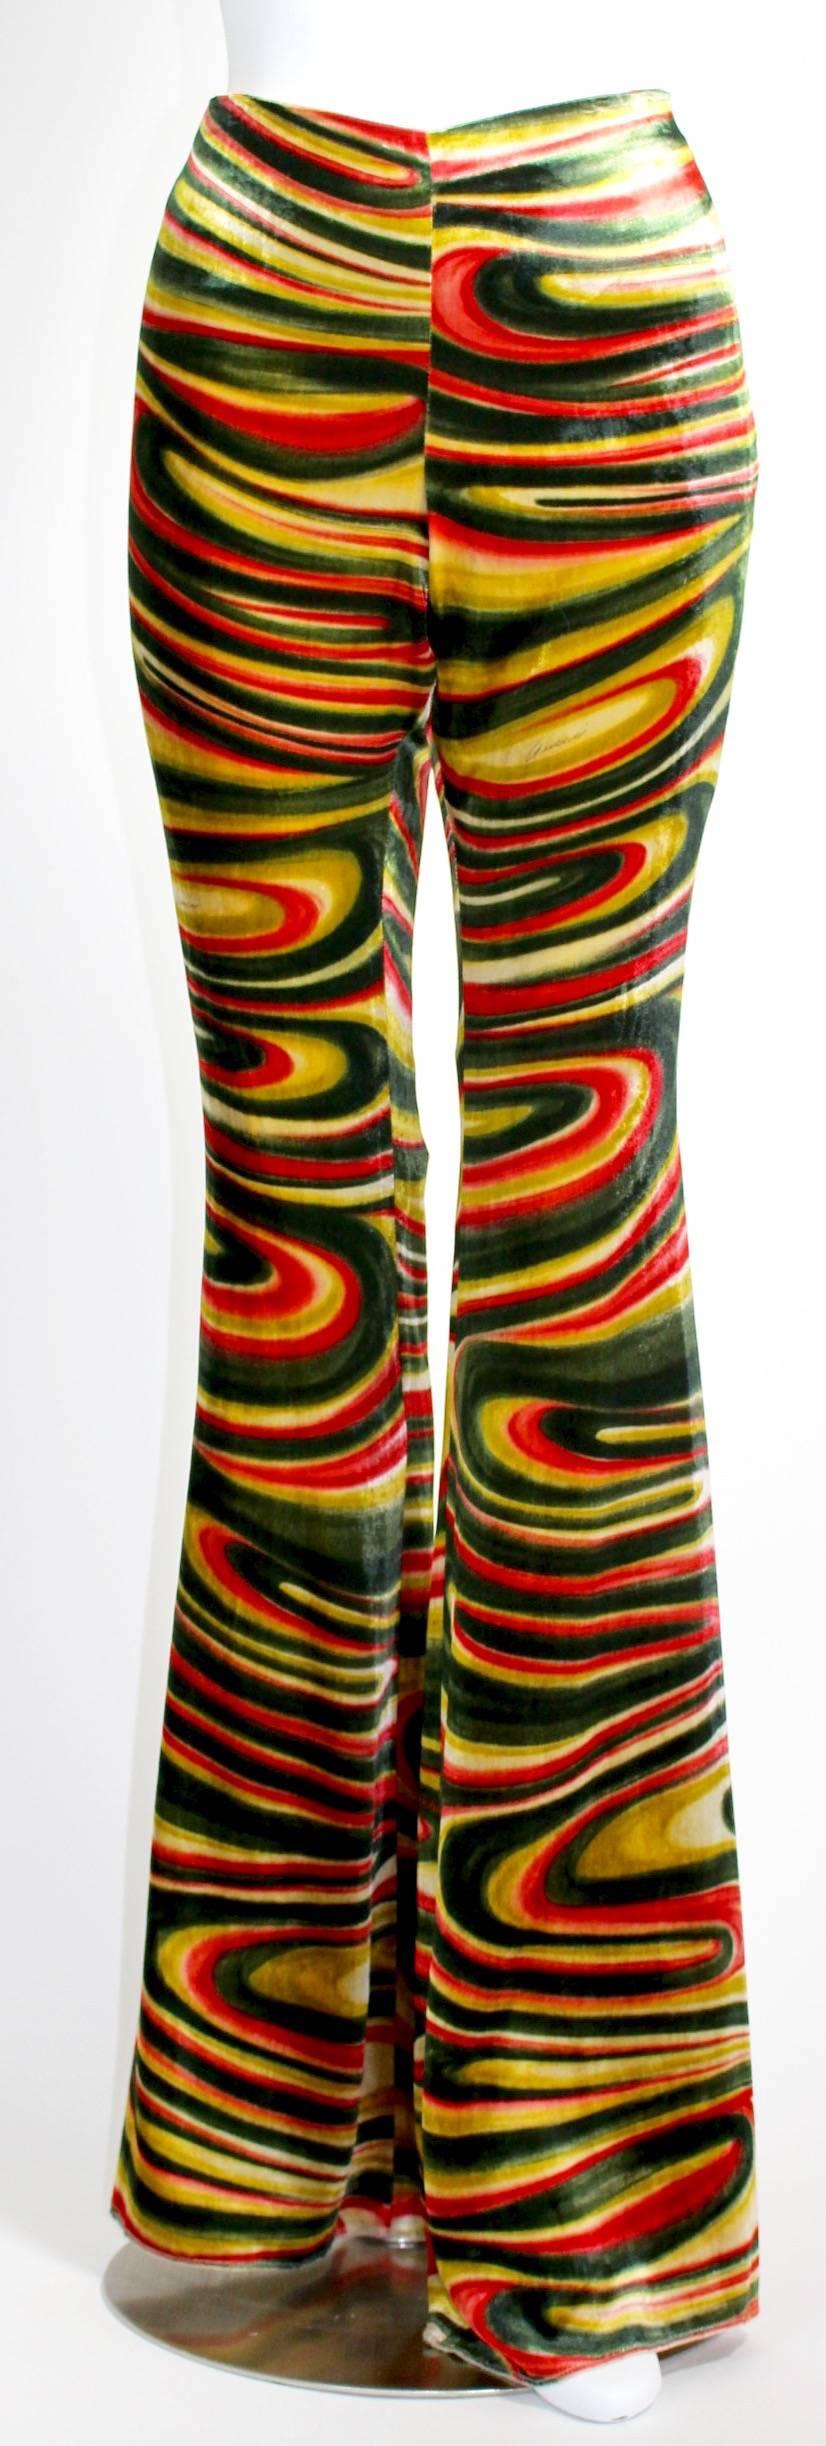 Gucci is renowned for its prints and the psychedelic swirl on these pants is among its most iconic. The pattern of undulating ripples in emerald, garnet and gold was designed by Tom Ford during his heyday as creative director for the Italian fashion